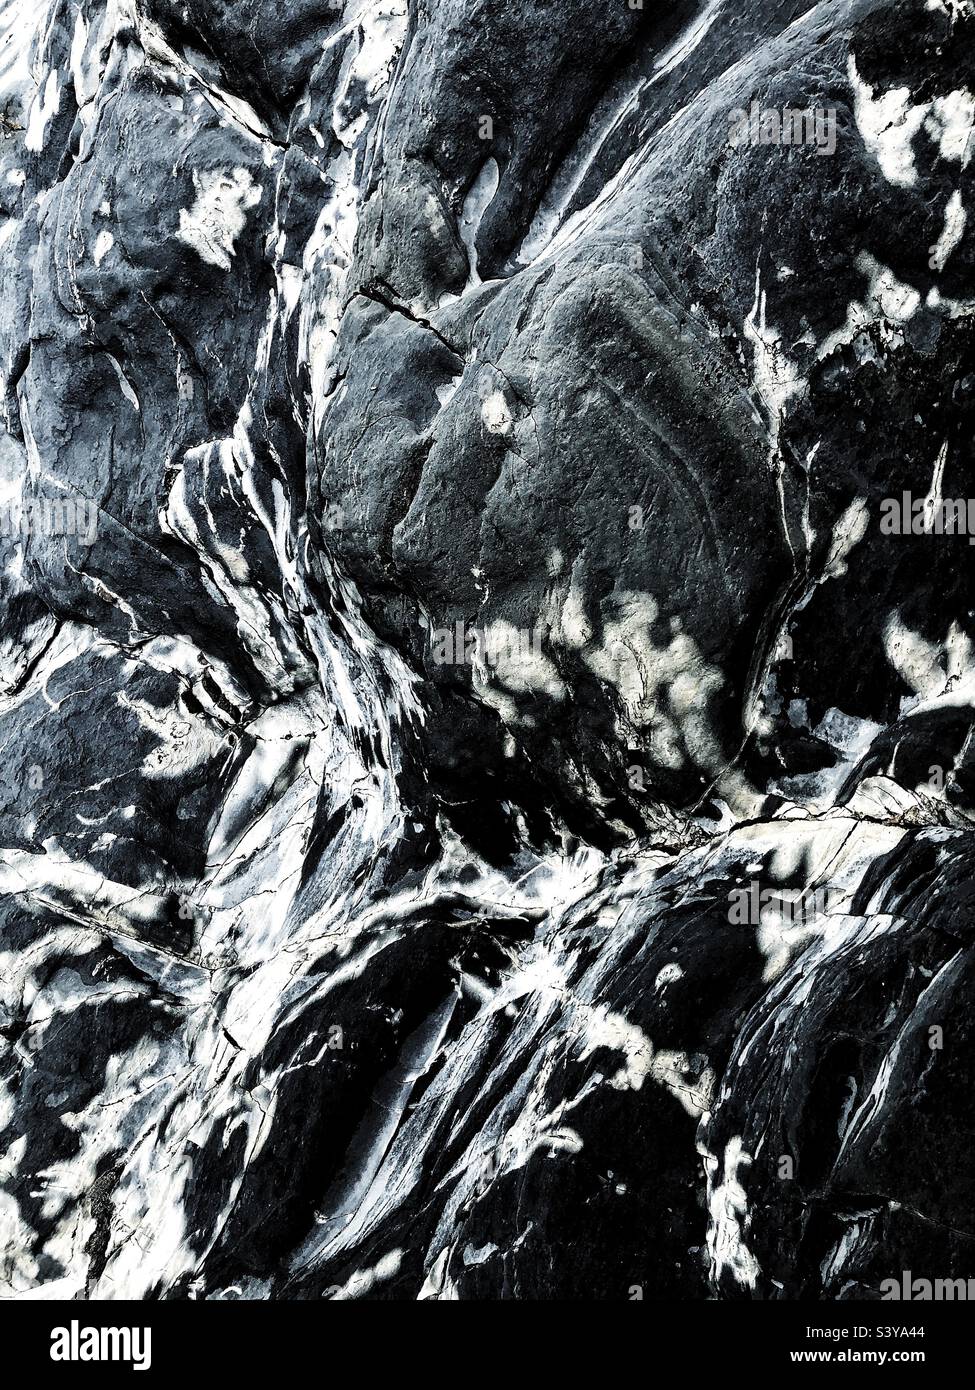 Full frame textured background of smooth marbled stone on a cliff cross section Stock Photo